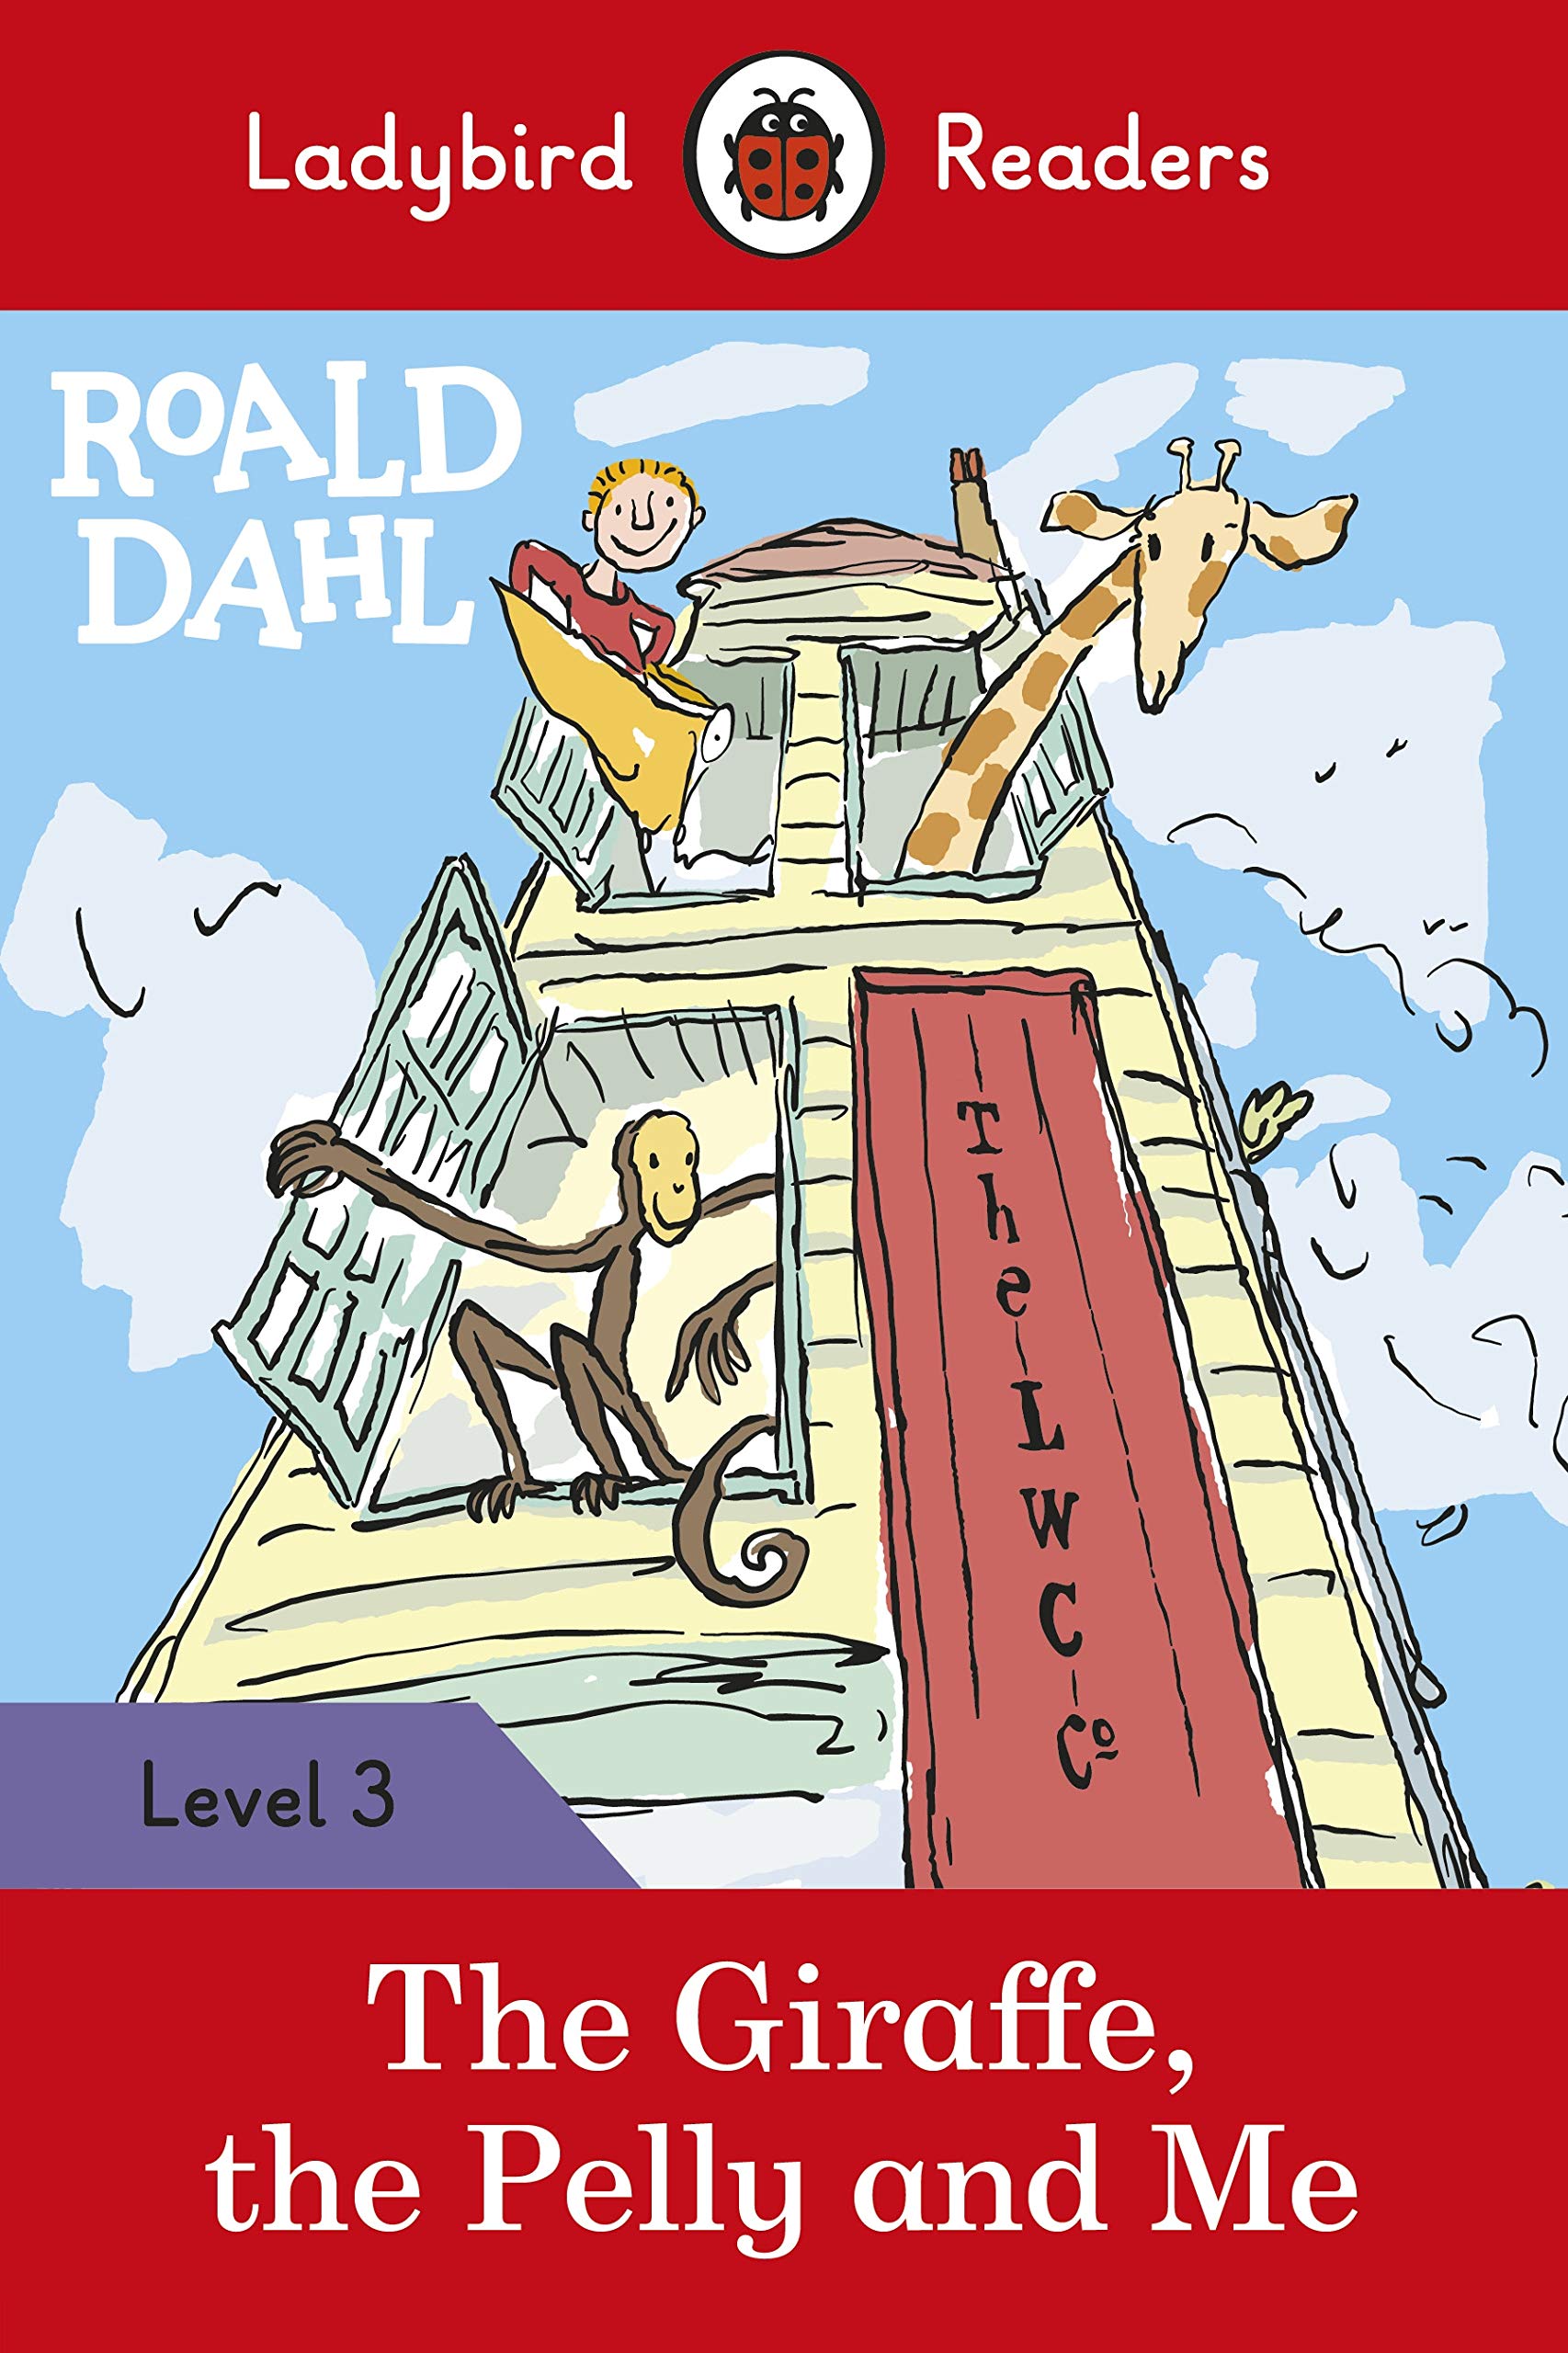 Ladybird readers level 3 - the giraffe, the pelly and me